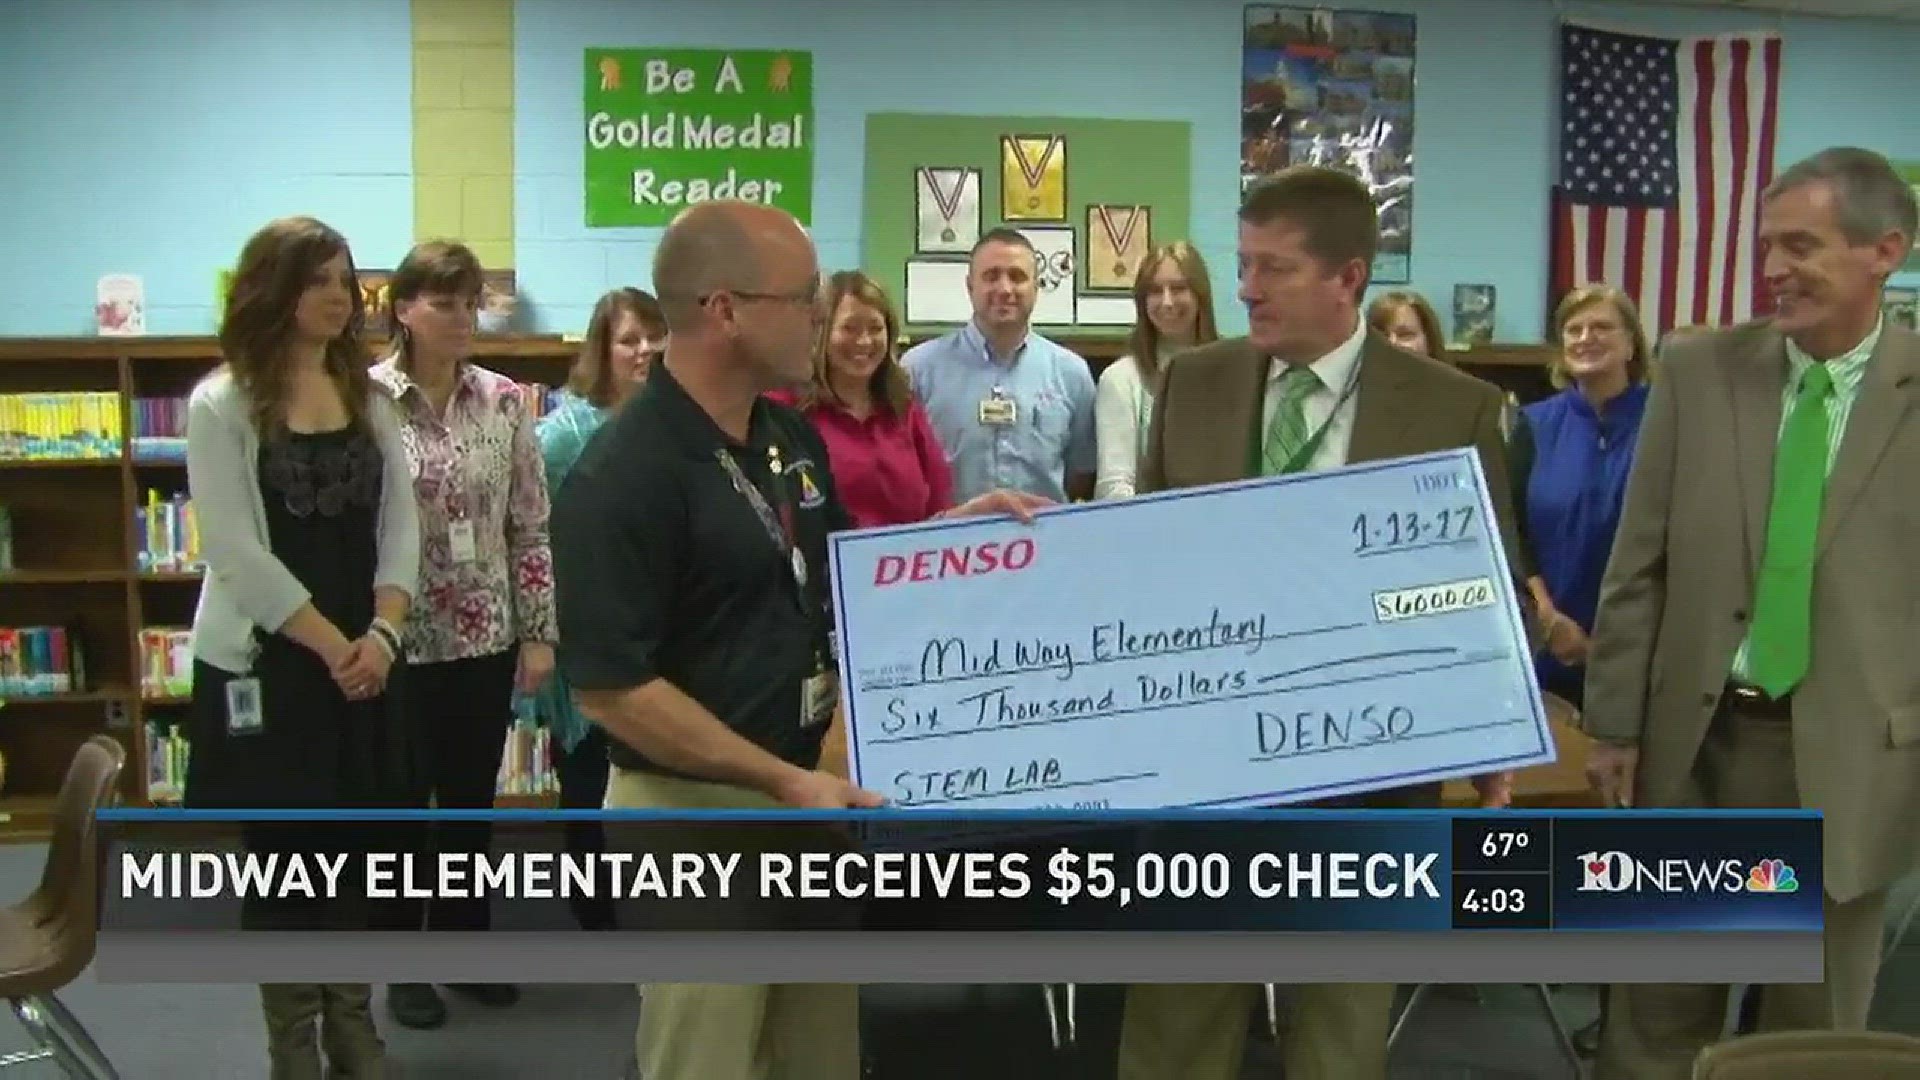 Jan. 13, 2017: Midway Elementary School in Roane County received a donation toward its STEM program from DENSO Manufacturing.